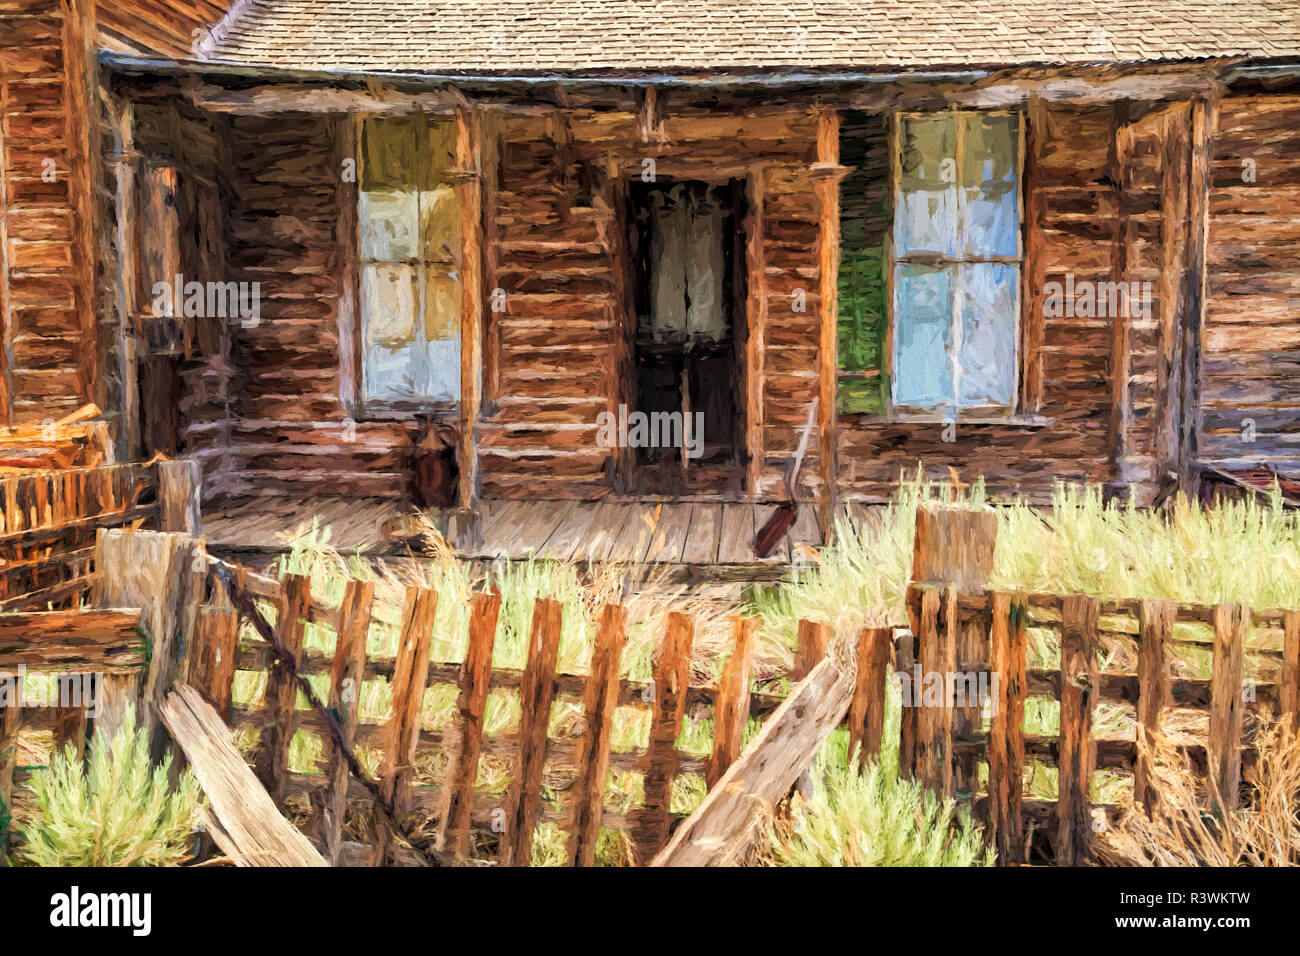 Painting of building, Bodie State Historic Park, California. Stock Photo